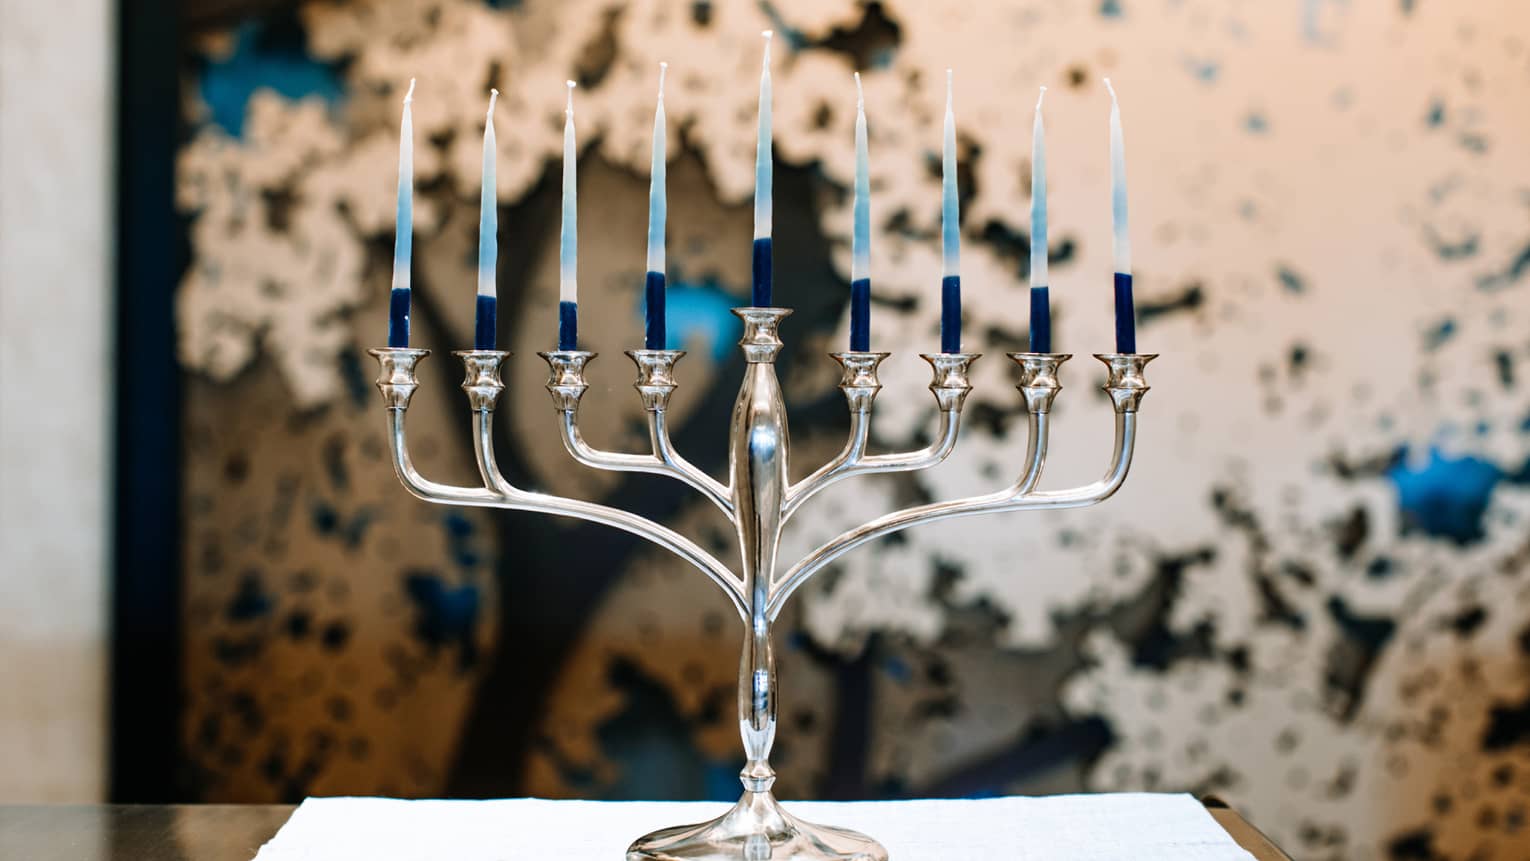 A silver menorah with 9 candles.